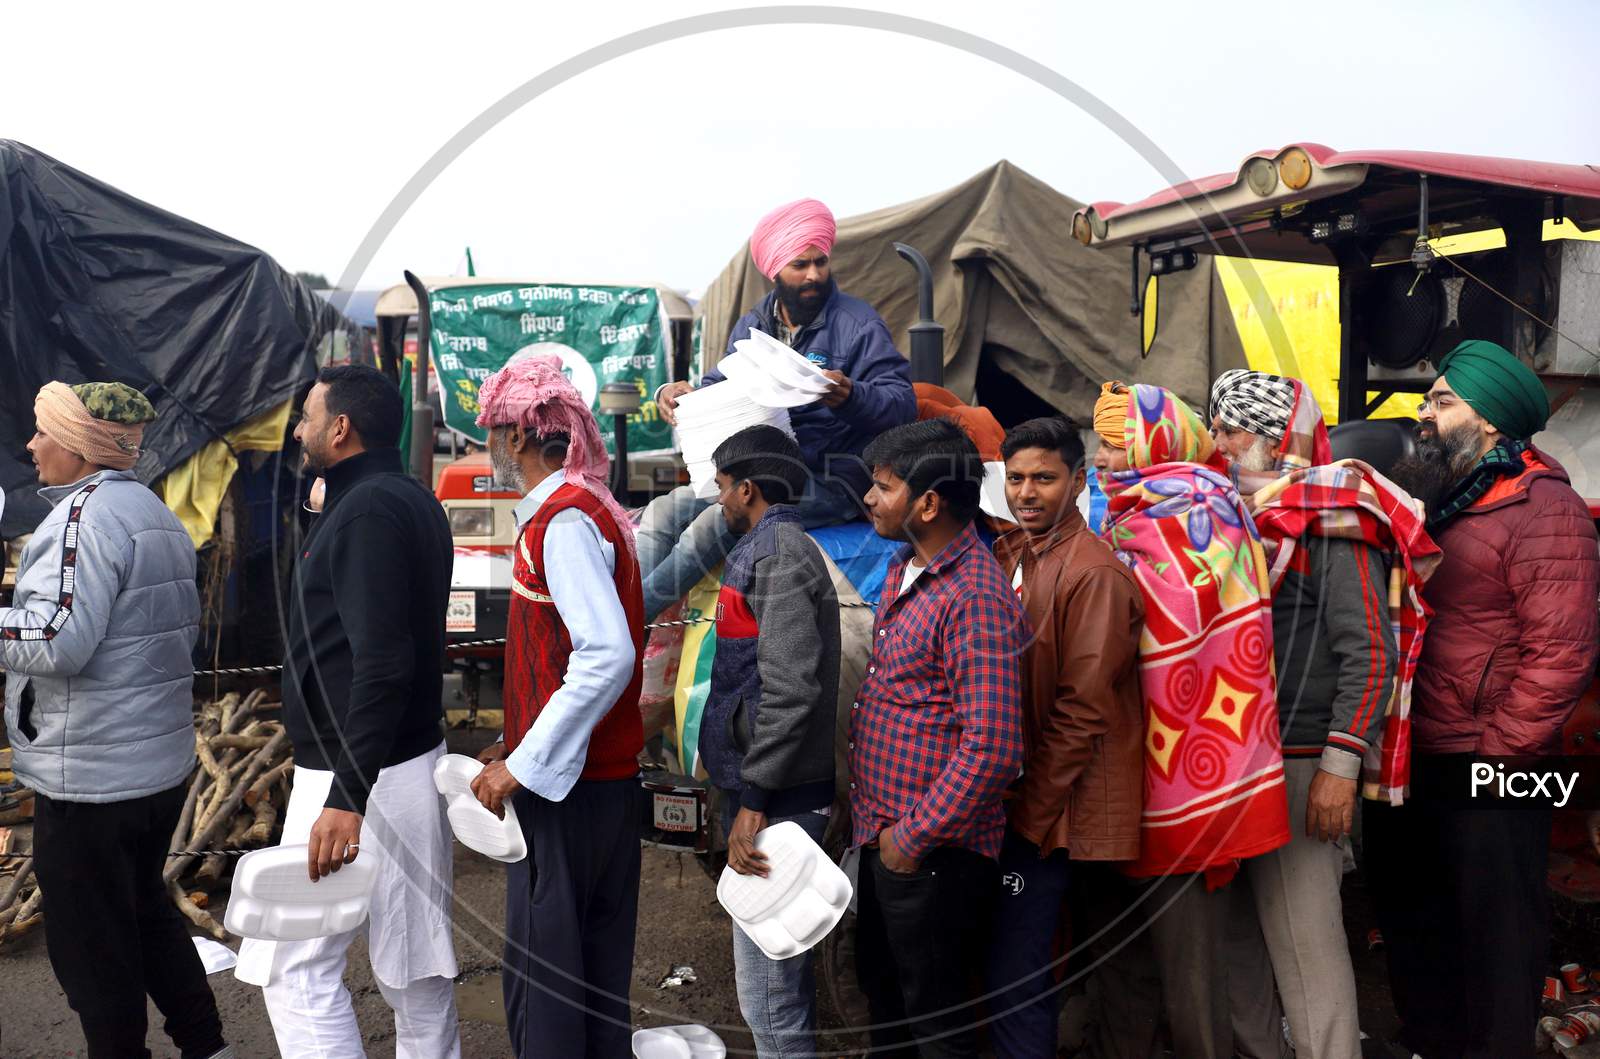 Farmers at a Blocked National Highway At  Singhu Border Near New Delhi, On January 10, 2021, During An Ongoing Sit-In Protest Demanding The Rollback Of 3 Government Agricultural Reforms Bill. More Than 60 Protesters Have Died Since The Agitation Began In November-End, Farmer Groups Claim.